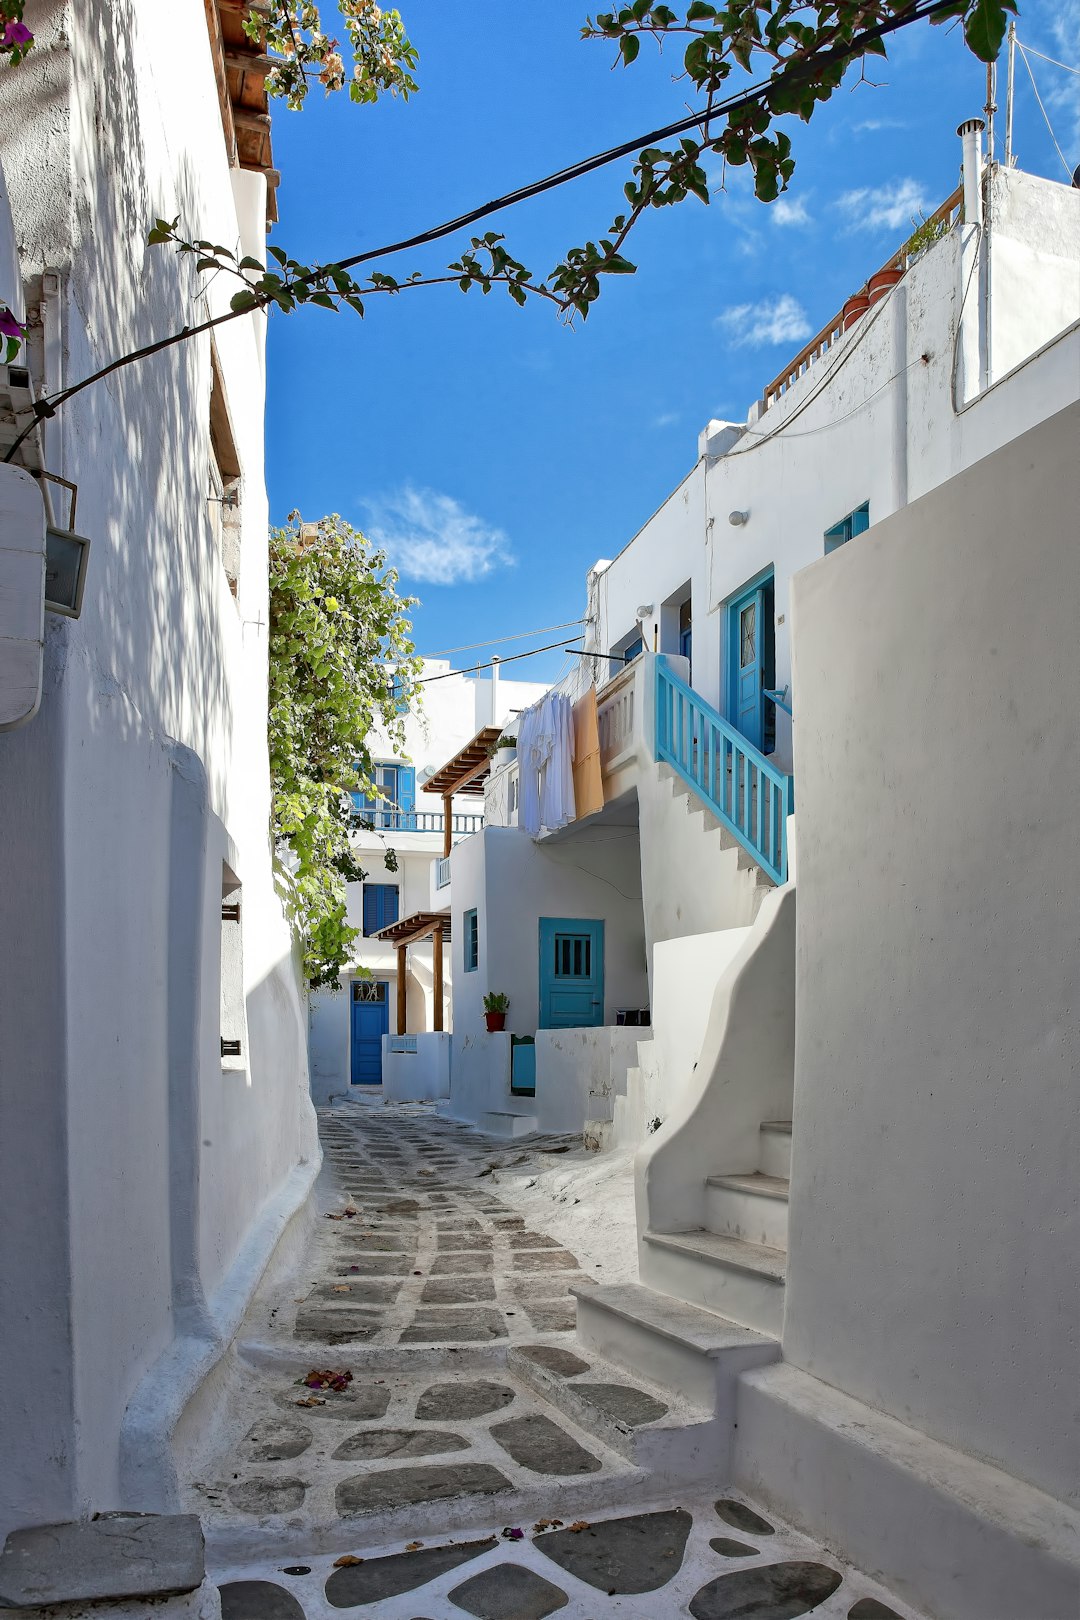 Travel Tips and Stories of Mykonos in Greece